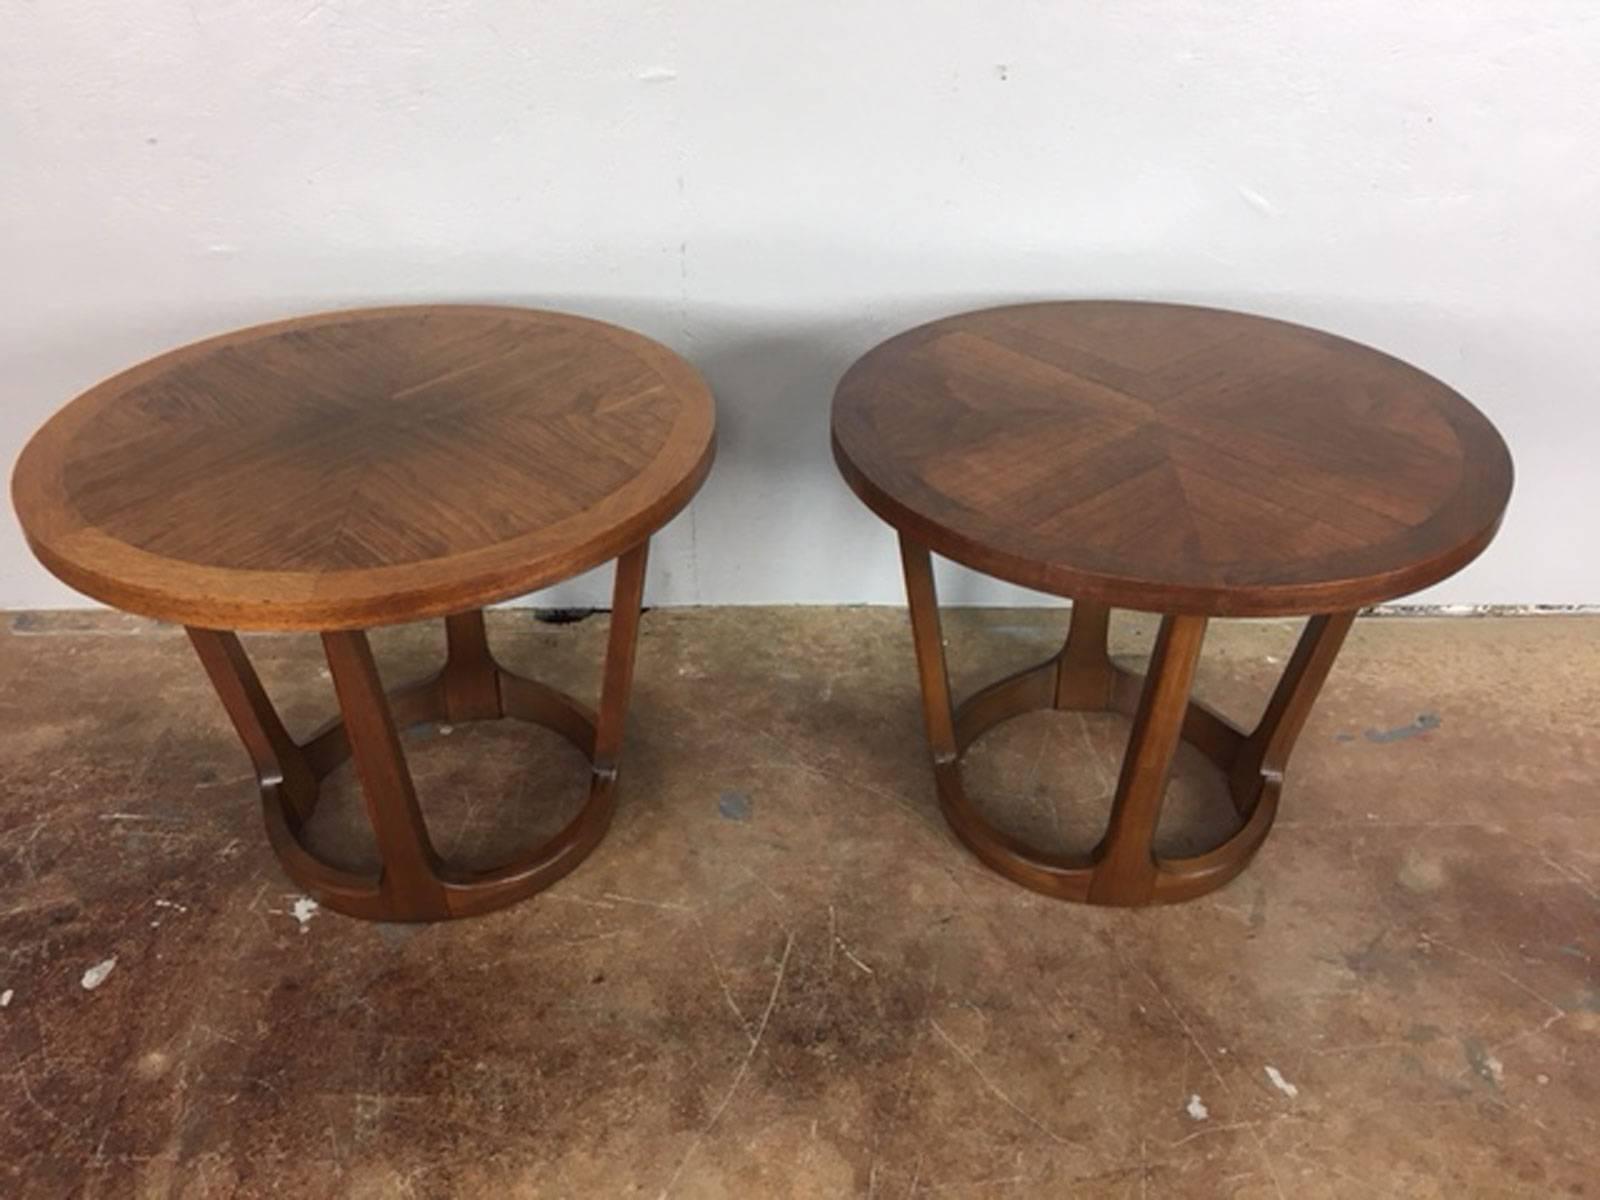 These stylish Adrian Pearsall style tables were designed and manufactured by Lane in the late 1960s. Excellent original condition.